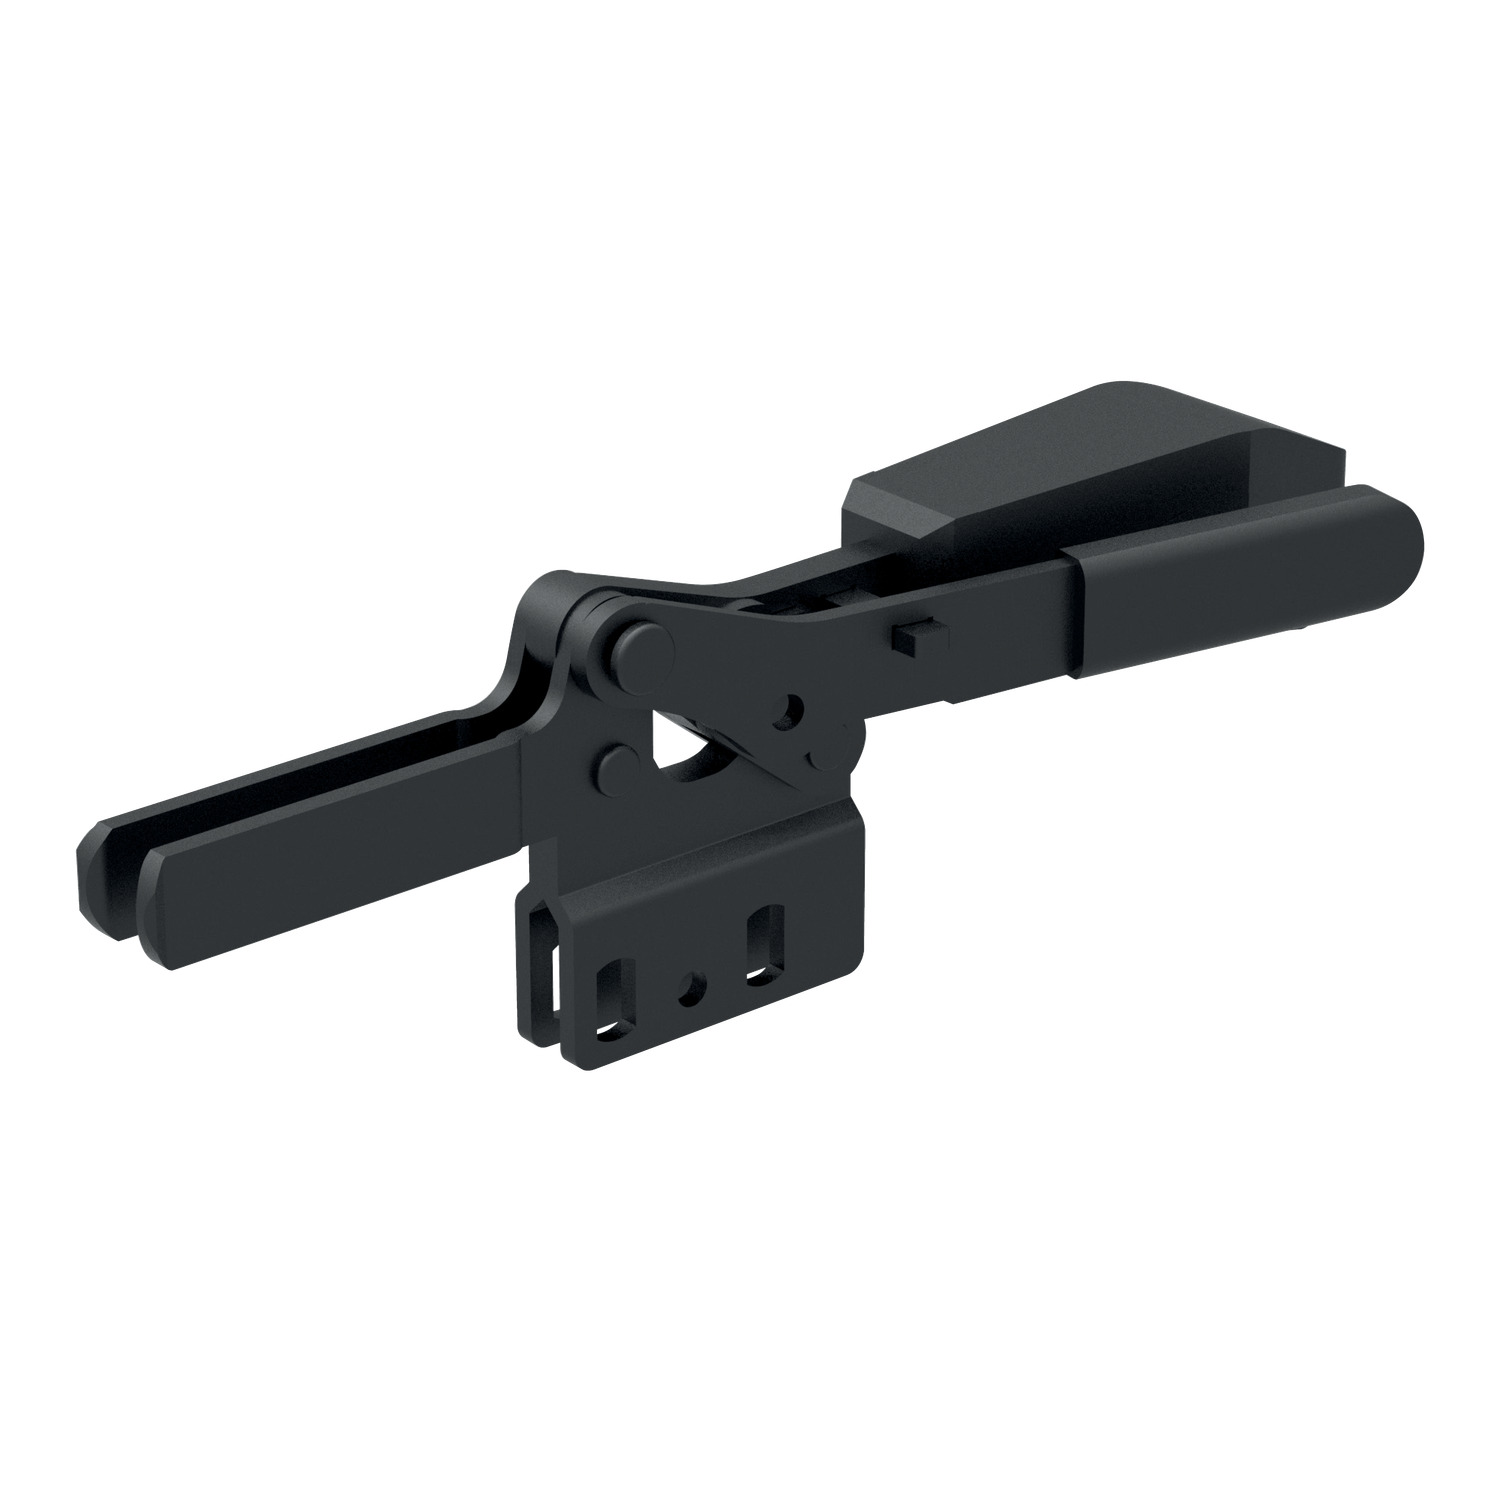 Product 41064.2, Horizontal Acting Toggle Clamps black - open arm - vertical base - safety / 